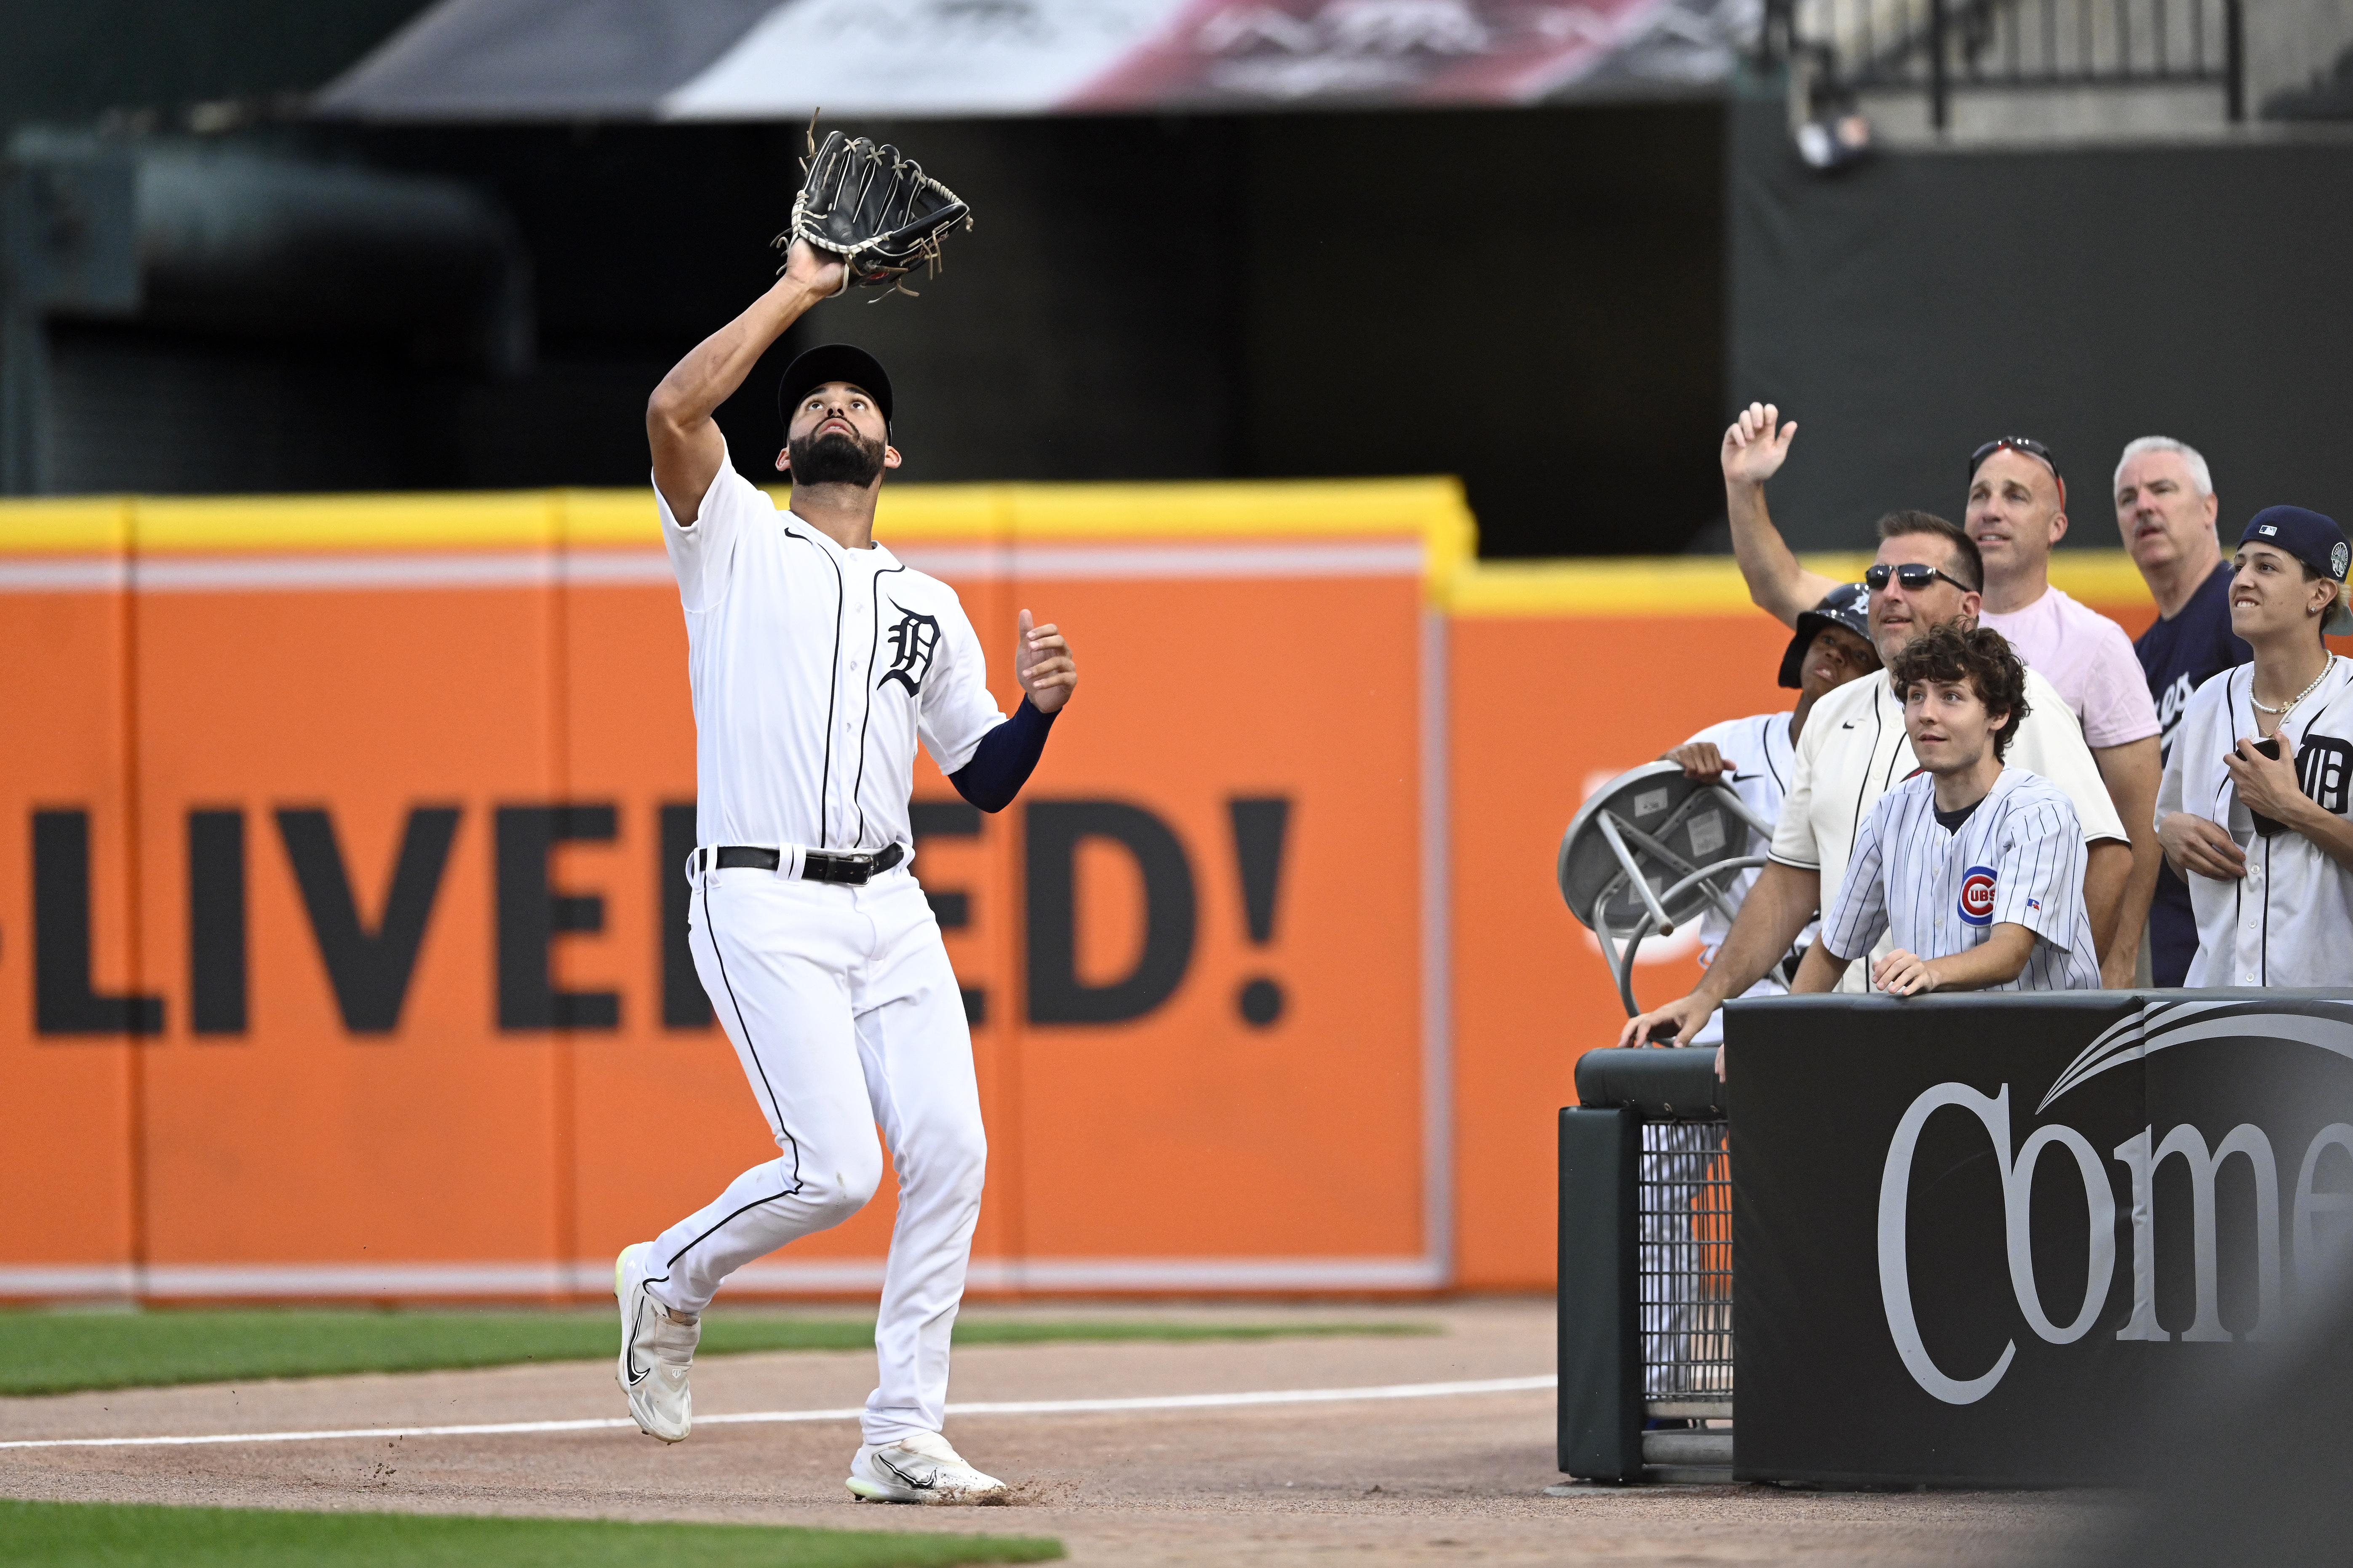 Tigers outfielder Riley Greene to undergo elbow surgery Wednesday